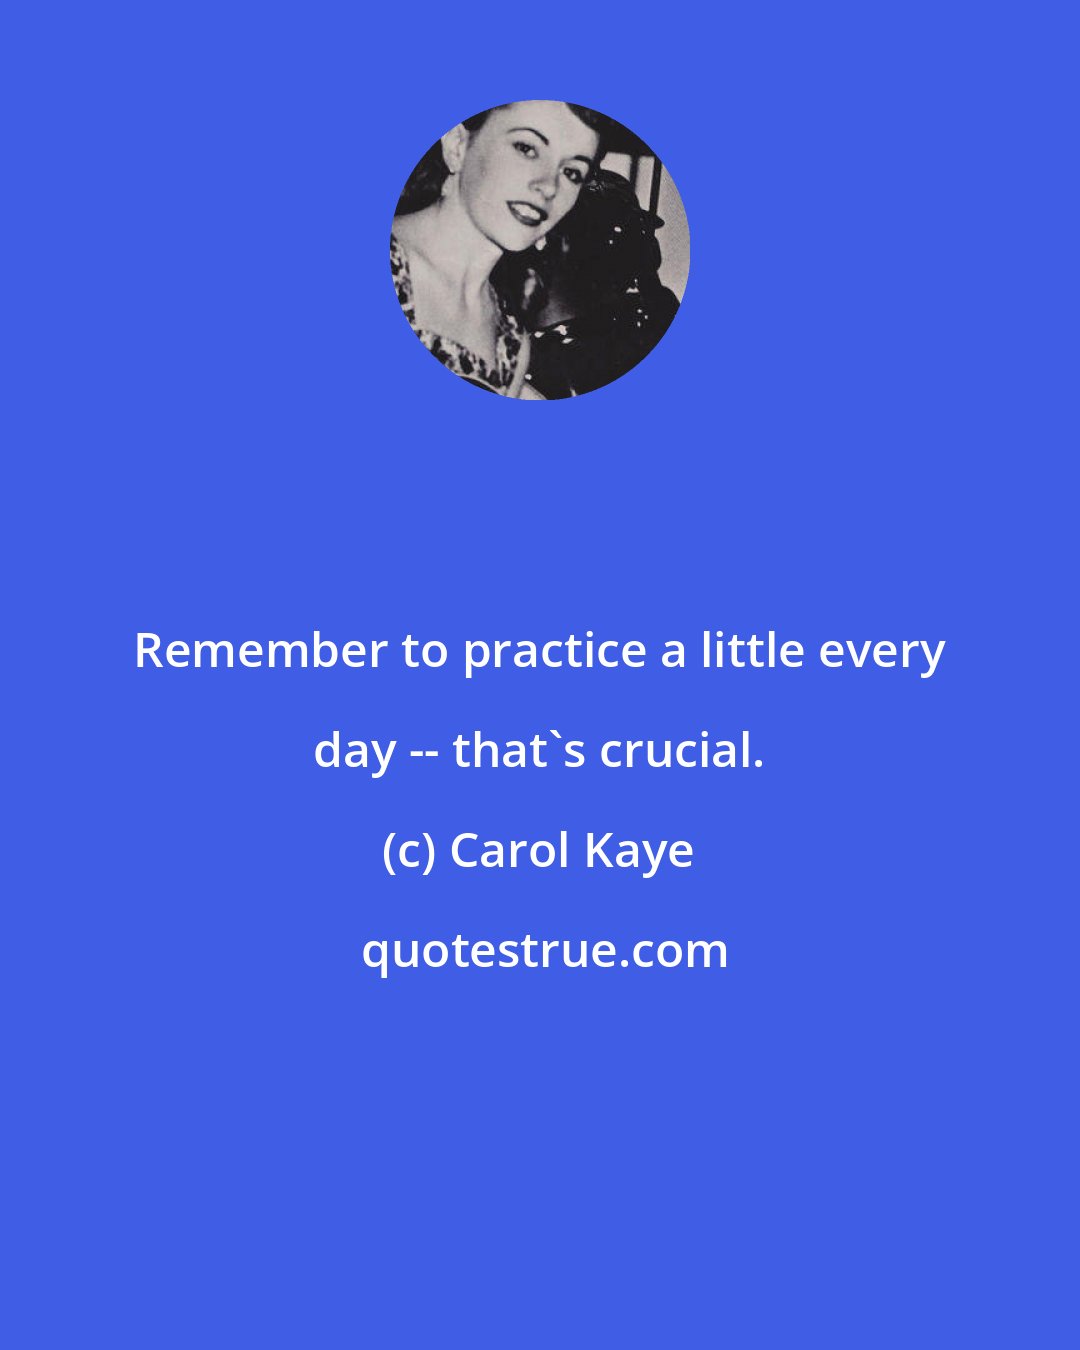 Carol Kaye: Remember to practice a little every day -- that's crucial.